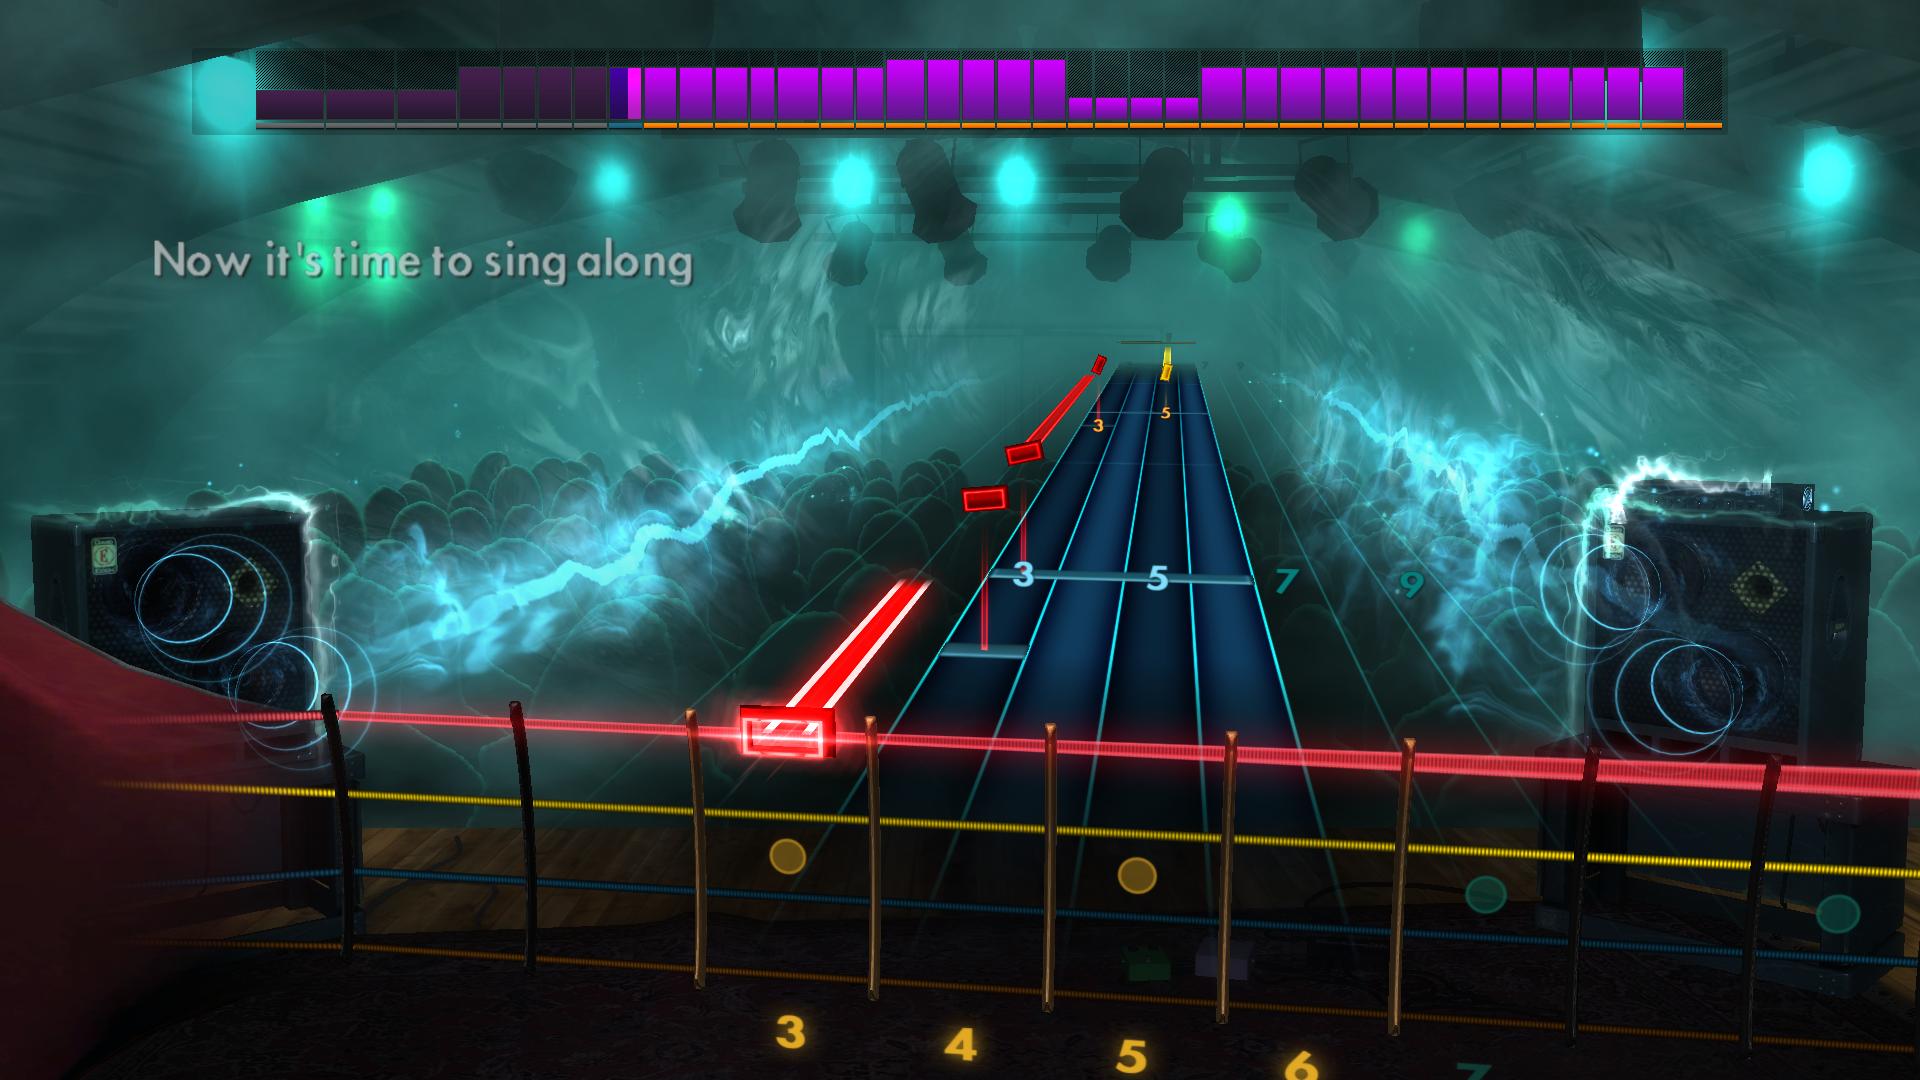 Rocksmith® 2014 – R.E.M. Song Pack on Steam